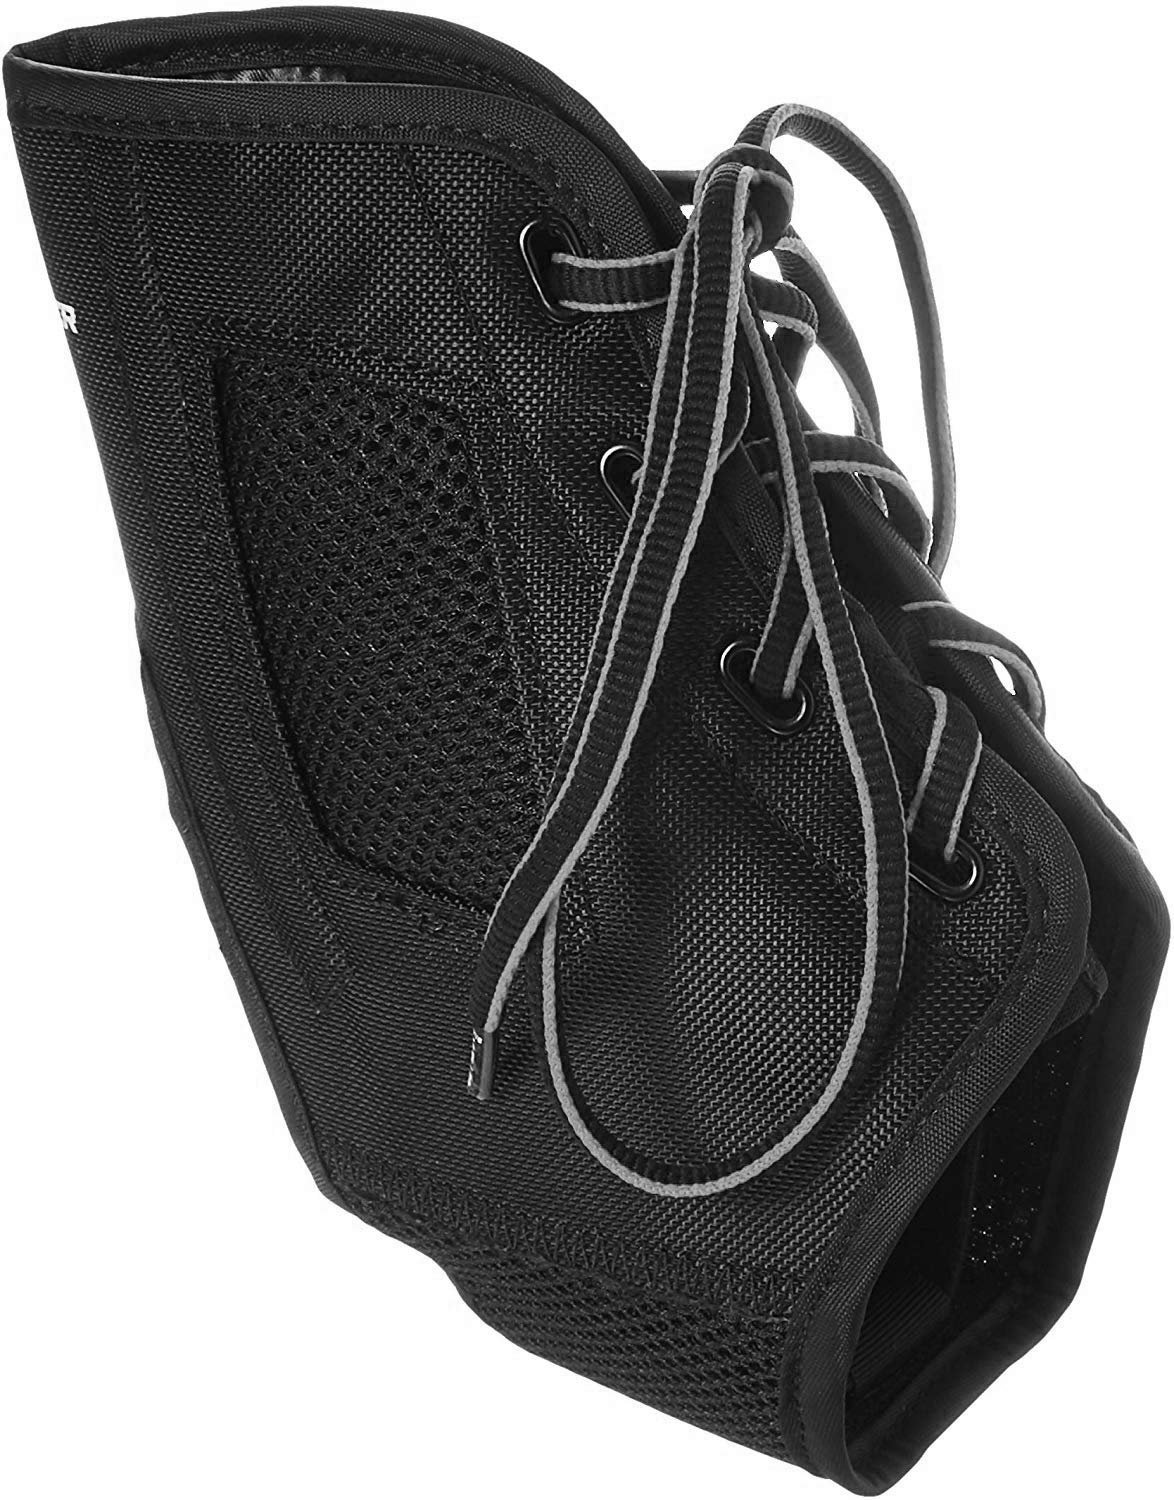 MUELLER Sports Medicine AFT3 Ankle Brace for Men and Women-Perfect for Running, Basketball, and Volleyball, Black, Small